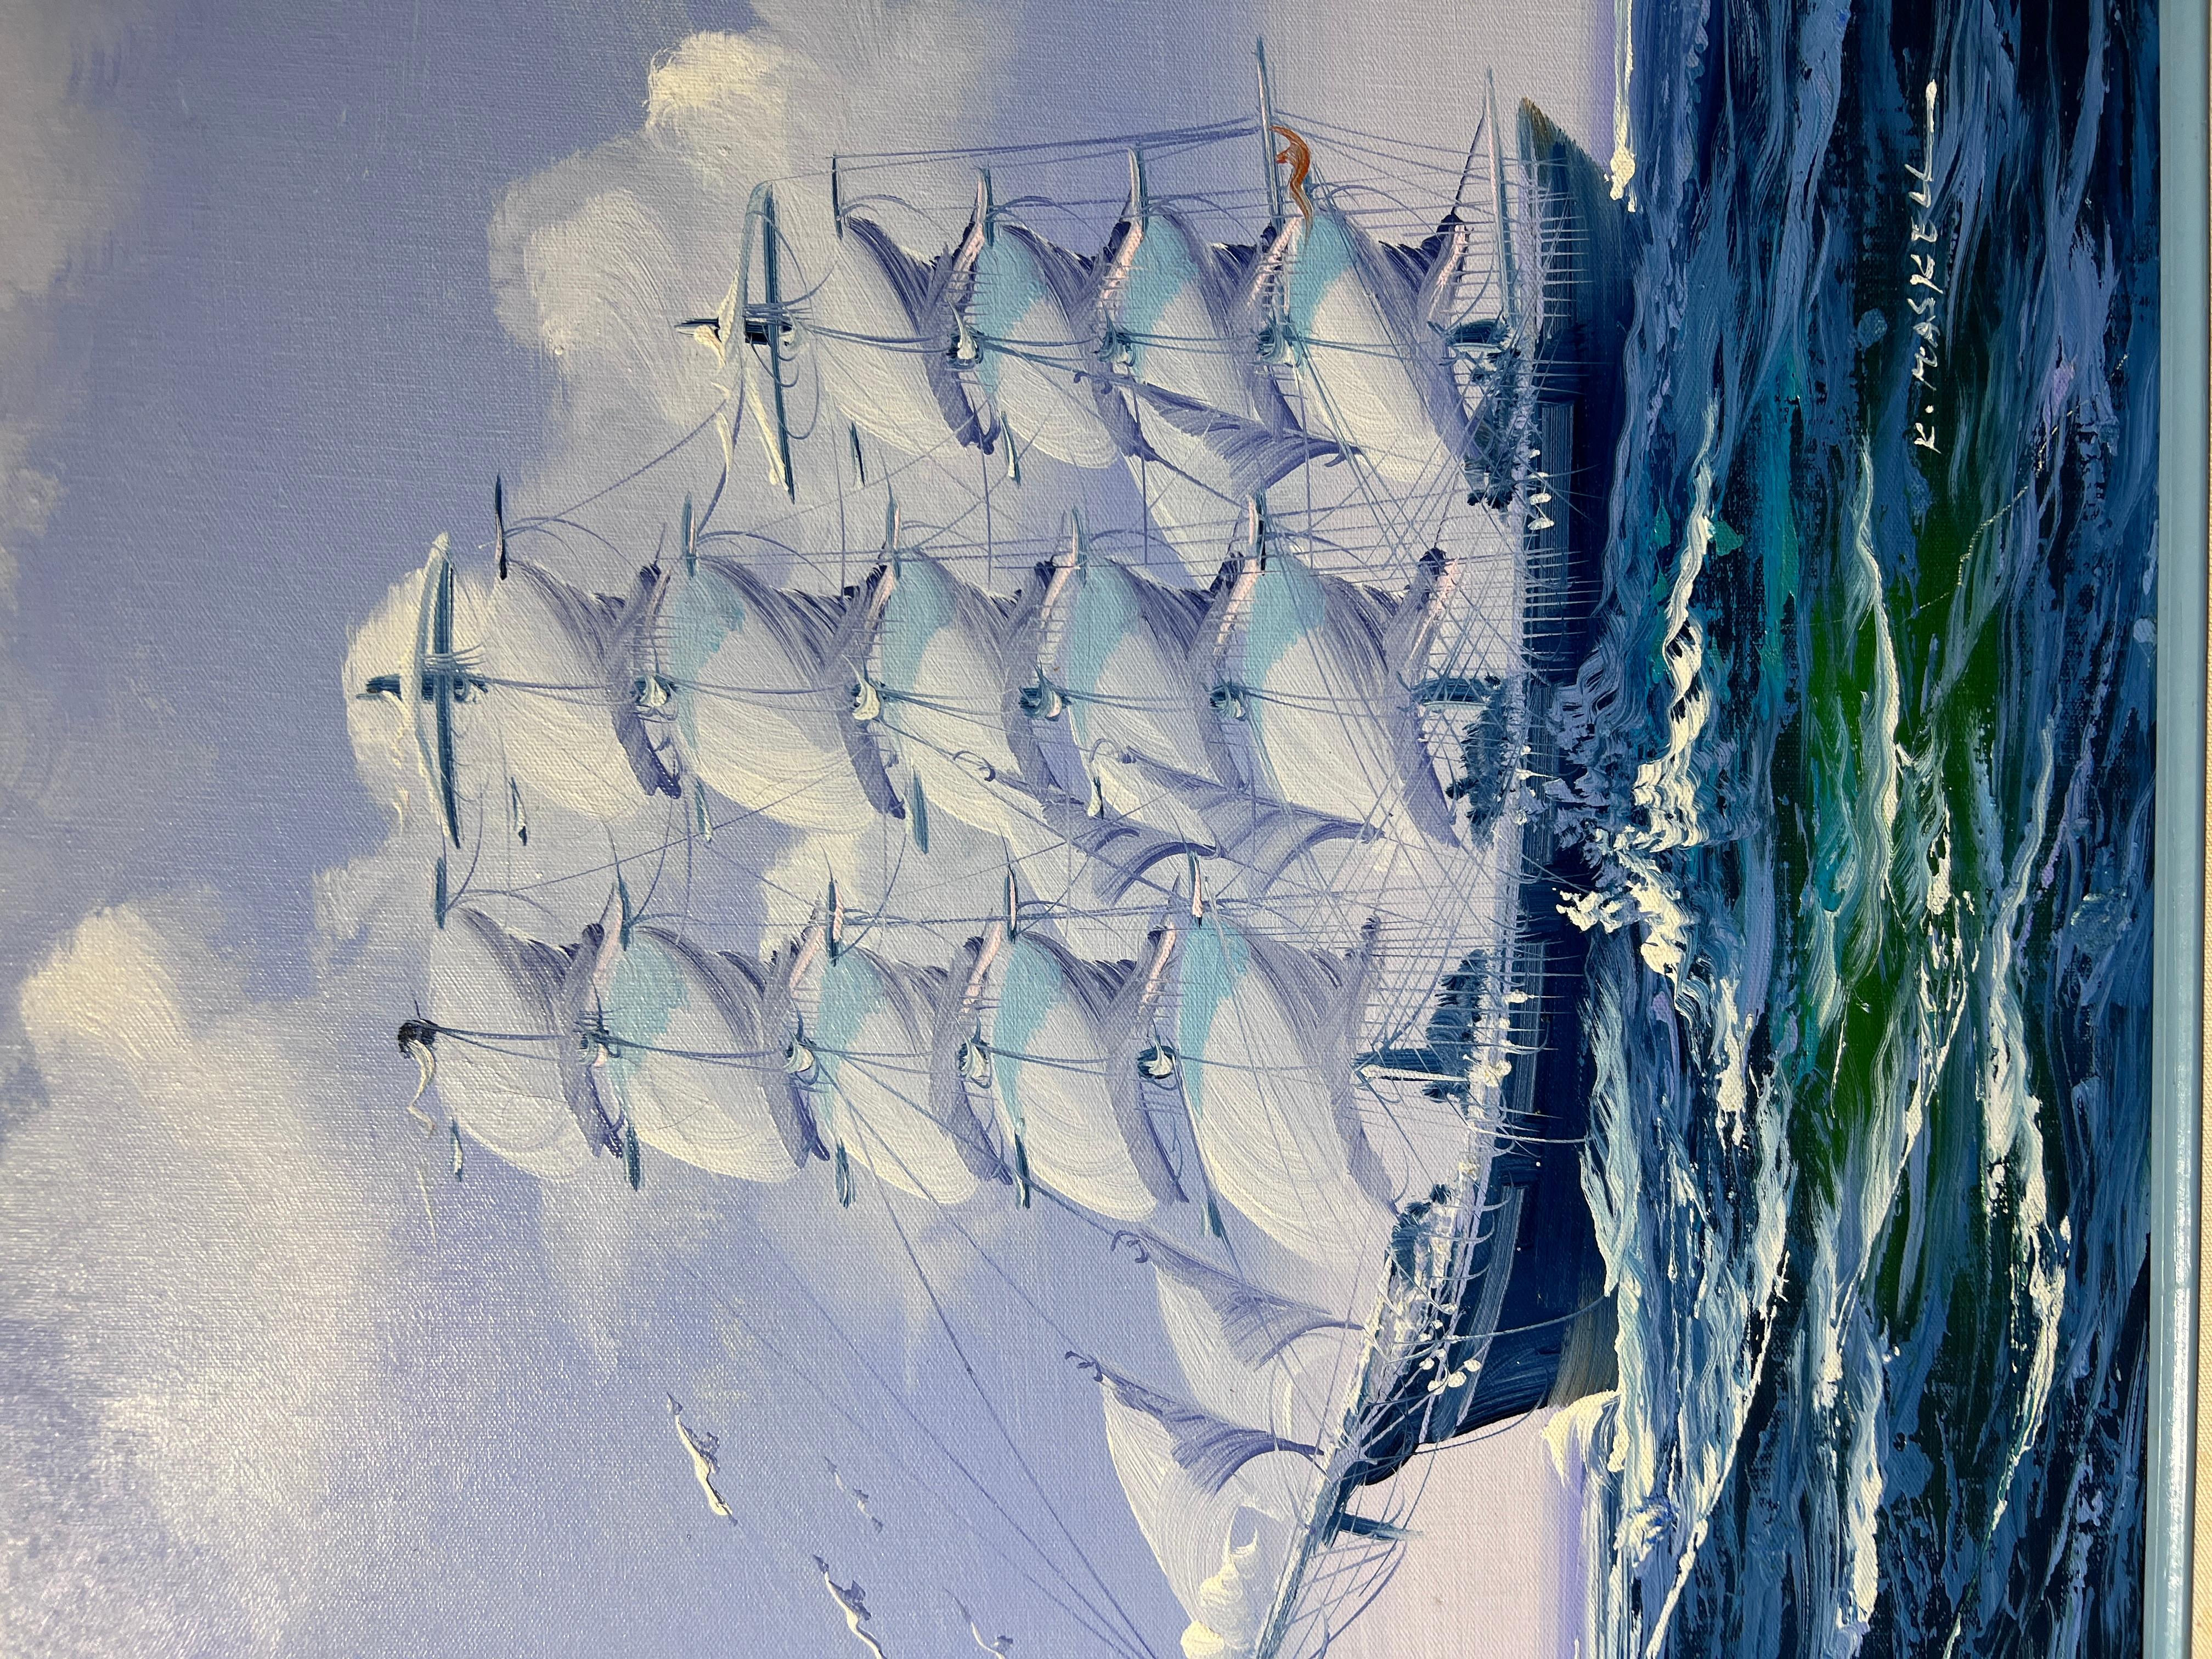 This oil painting captures the majesty of a tall ship in full sail on the high seas. Its sails are billowing in the wind, brilliantly white against the soft blue hues of the sky. The ship itself is rendered in fine detail, indicating the strength